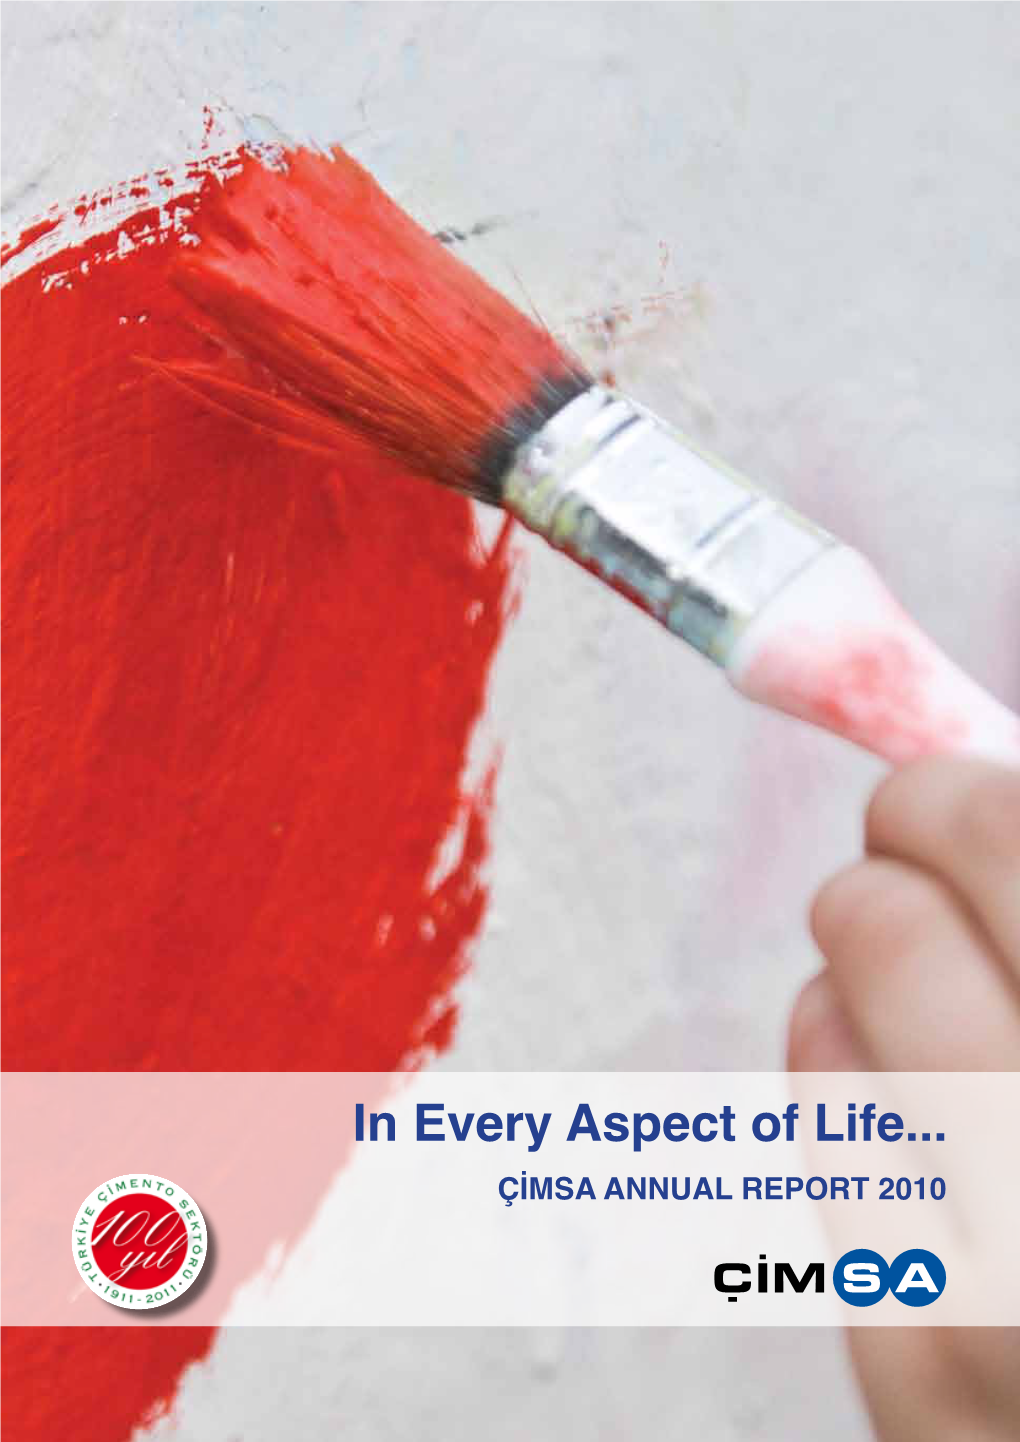 In Every Aspect of Life... ÇİMSA ANNUAL REPORT 2010 Contents